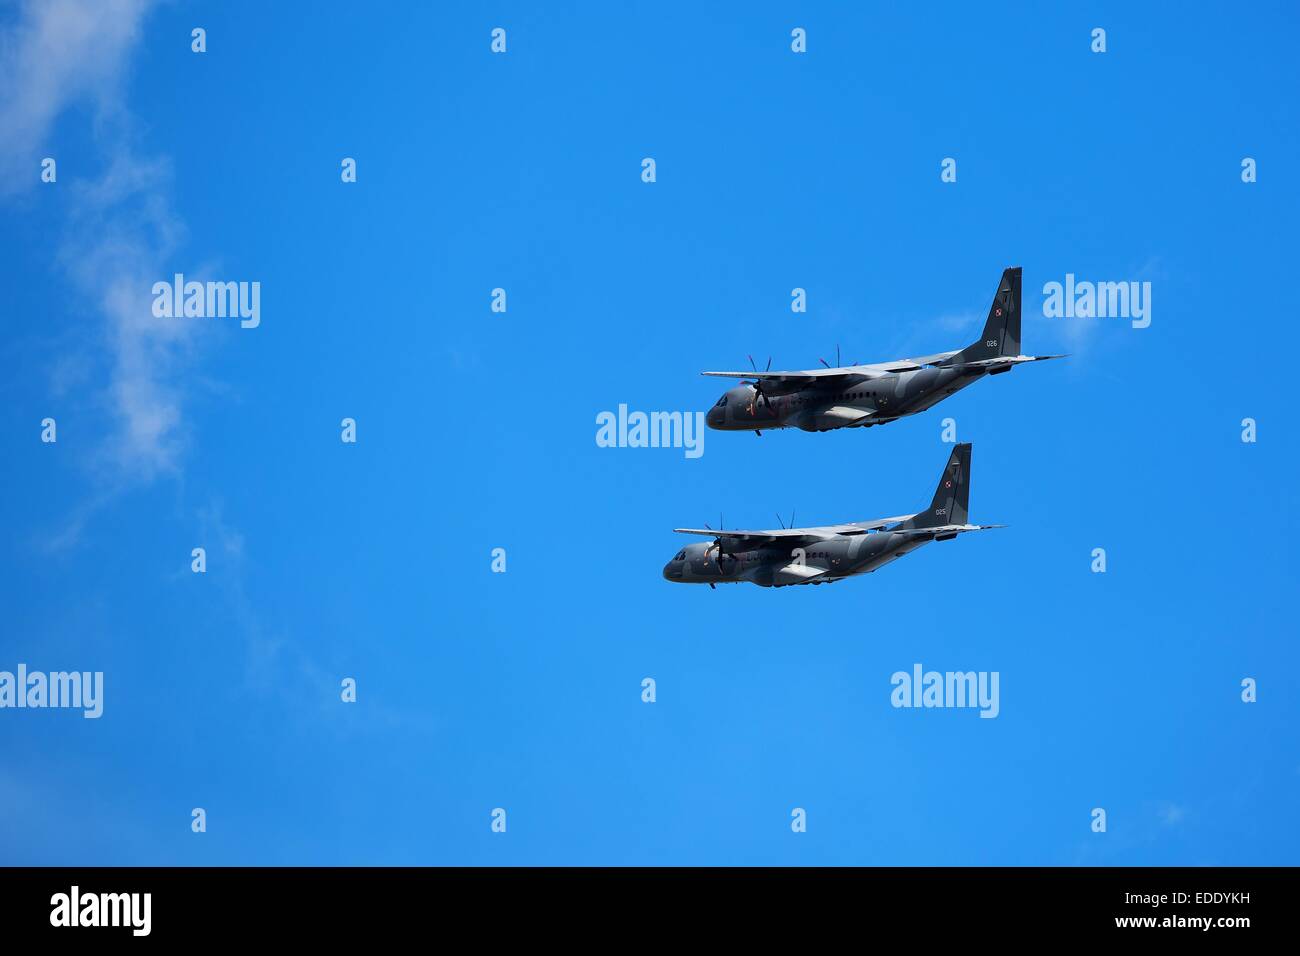 Military aircraft in flight Stock Photo